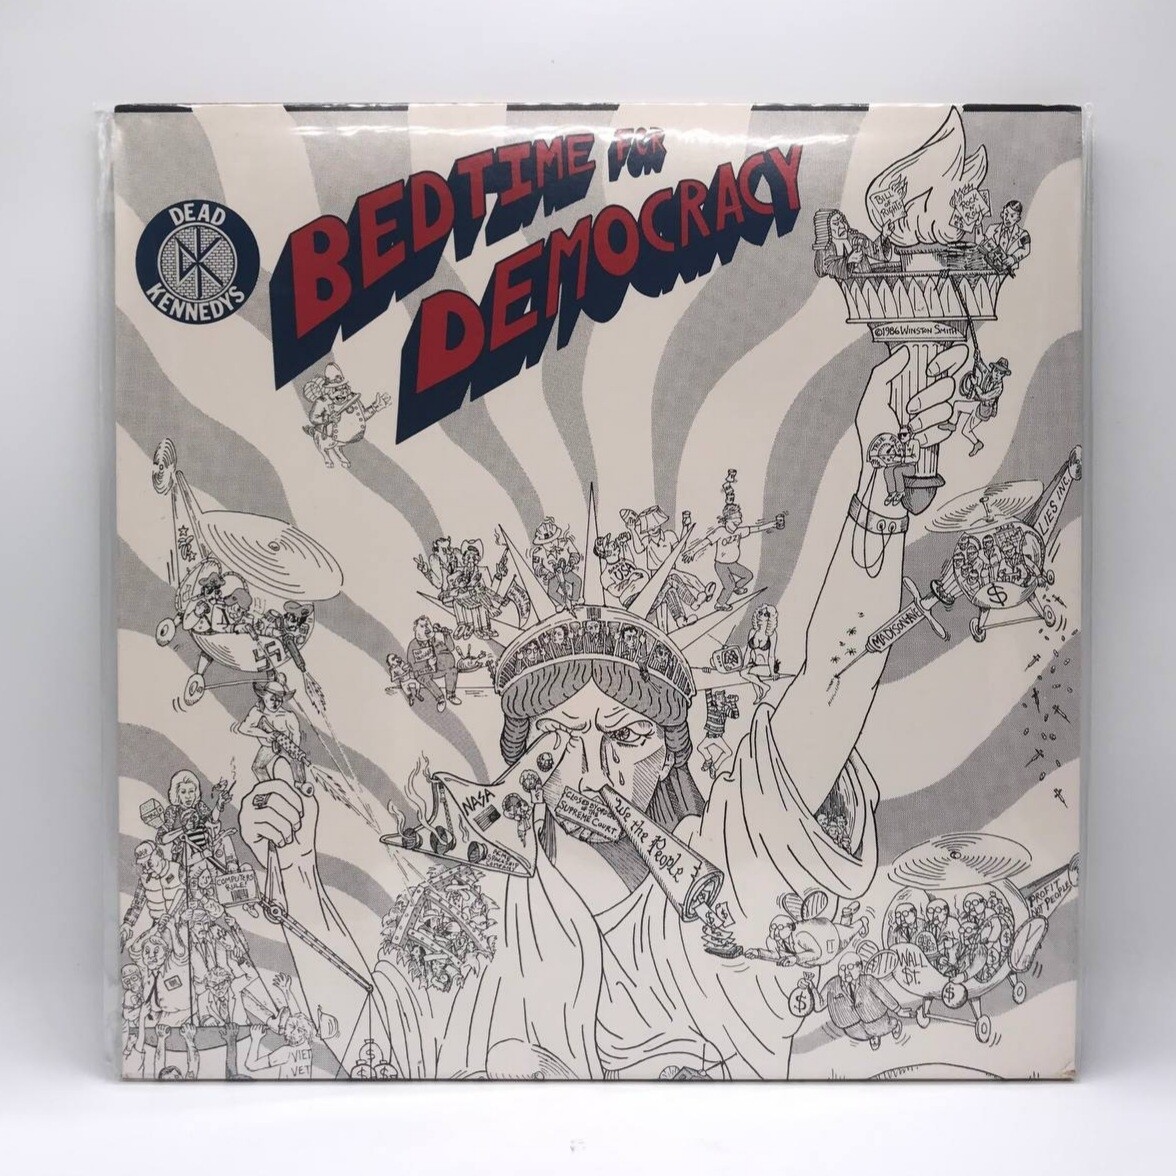 [USED] DEAD KENNEDYS -BEDTIME FOR DEMOCRACY- LP